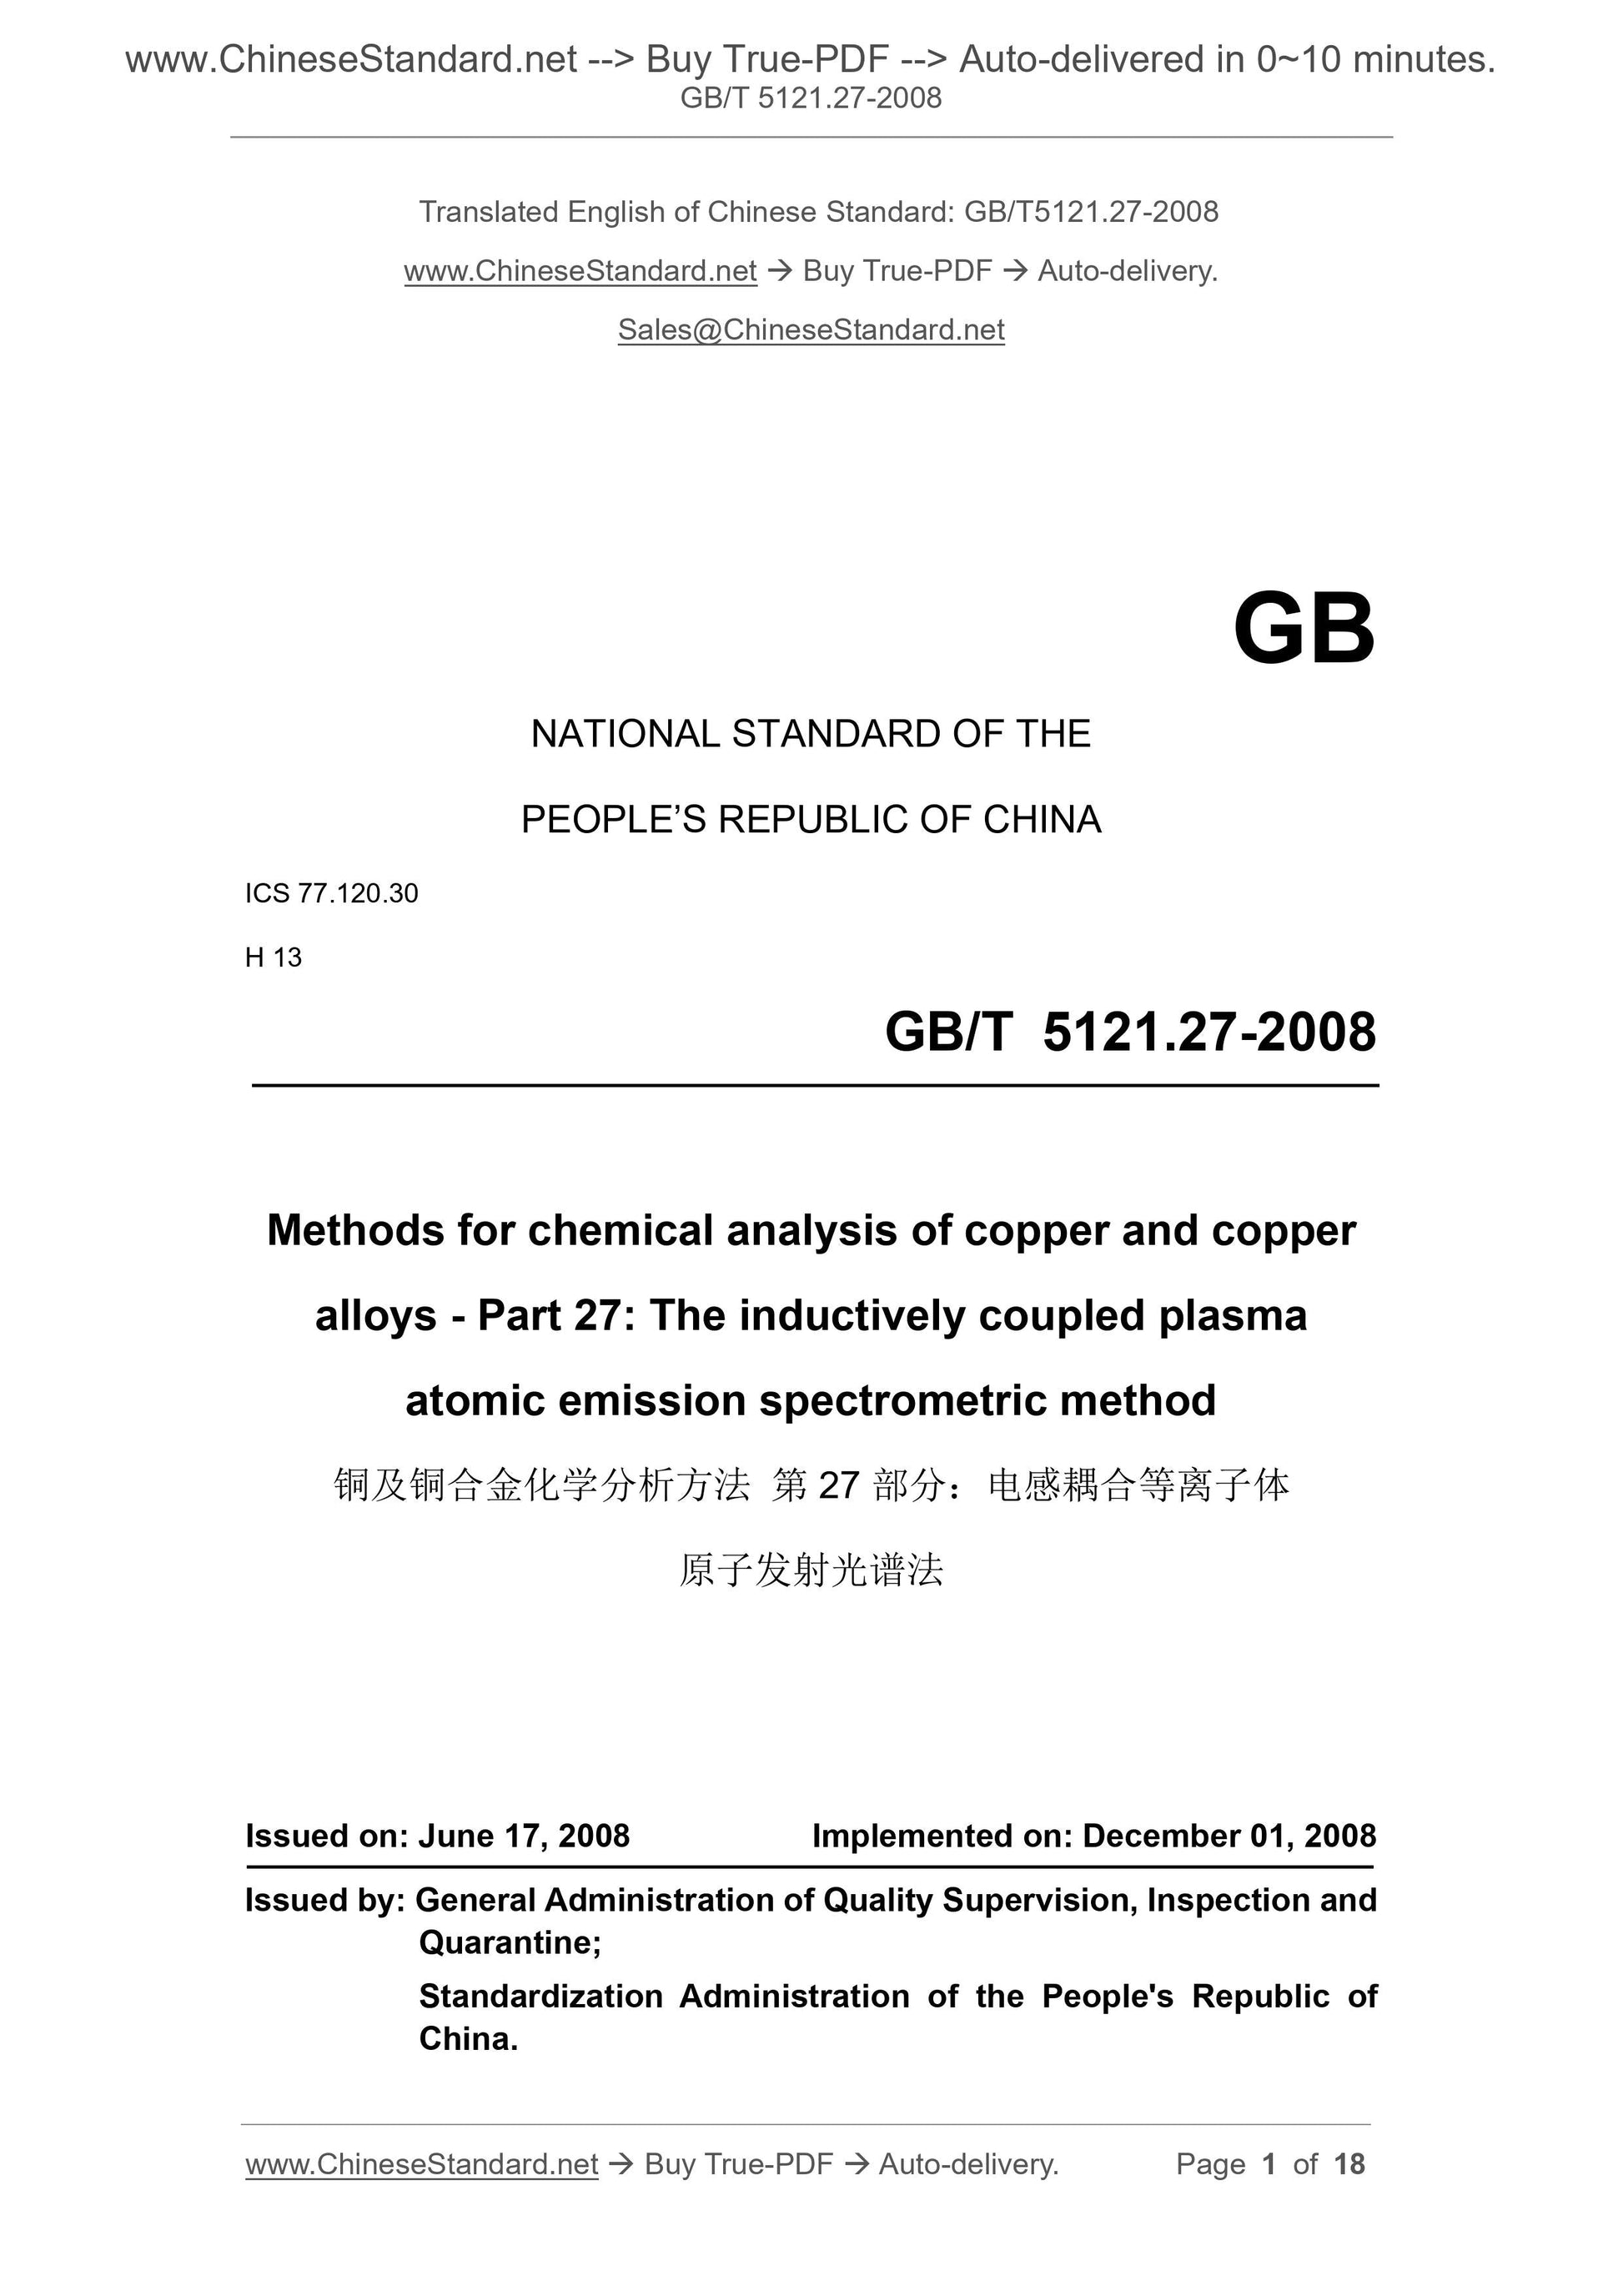 GB/T 5121.27-2008 Page 1